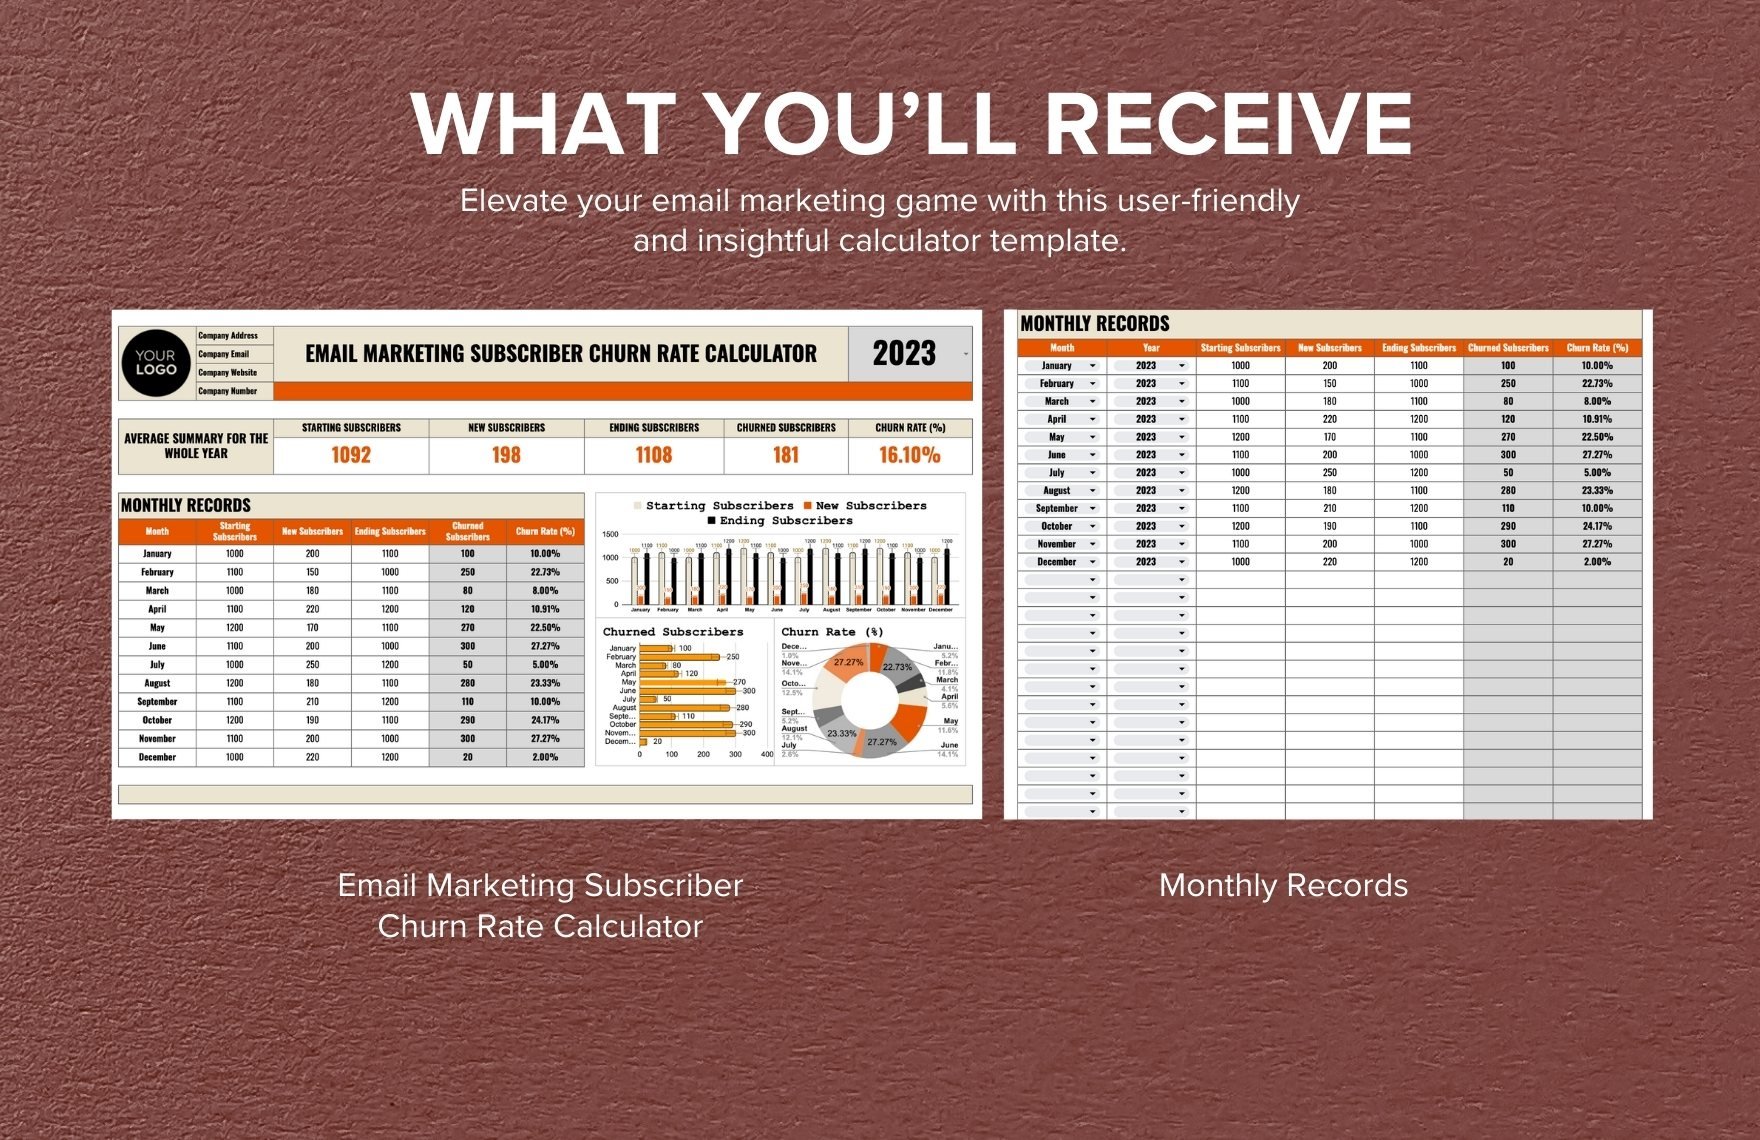 Email Marketing Subscriber Churn Rate Calculator Template